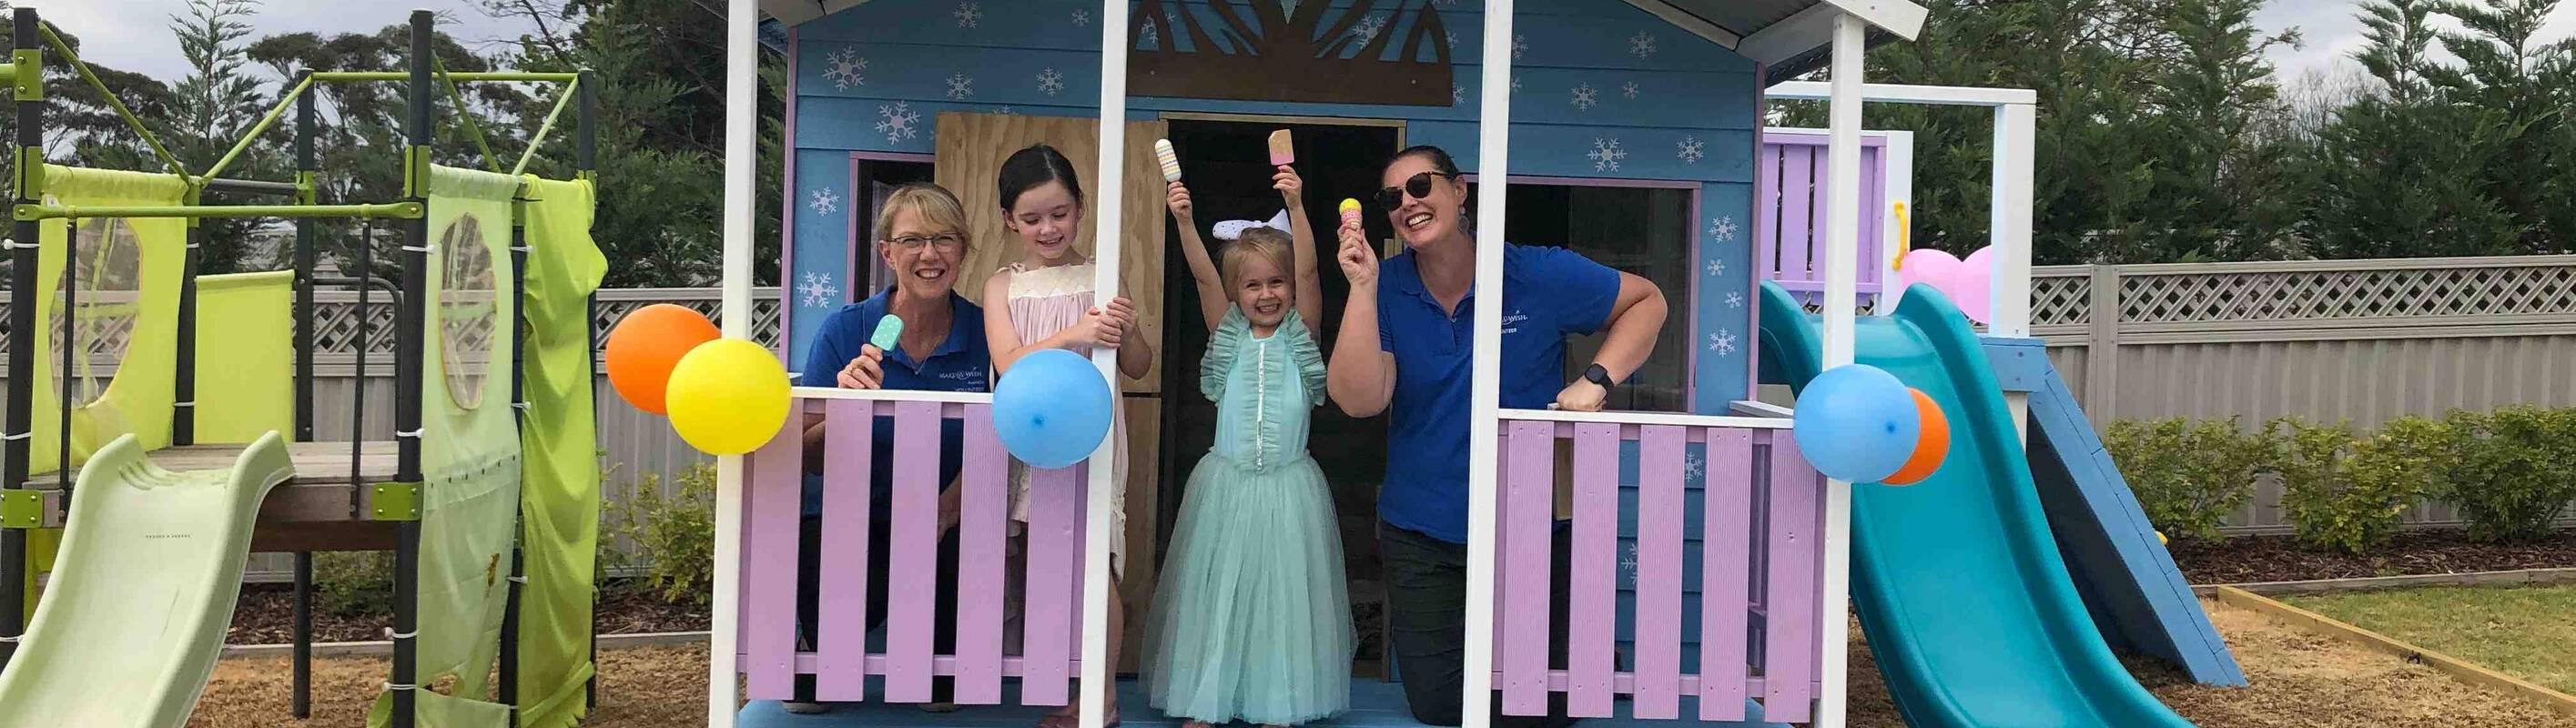 Make-A-Wish Australia wish kid Penelope celebrates in her new Frozen themed cubby house with volunteers